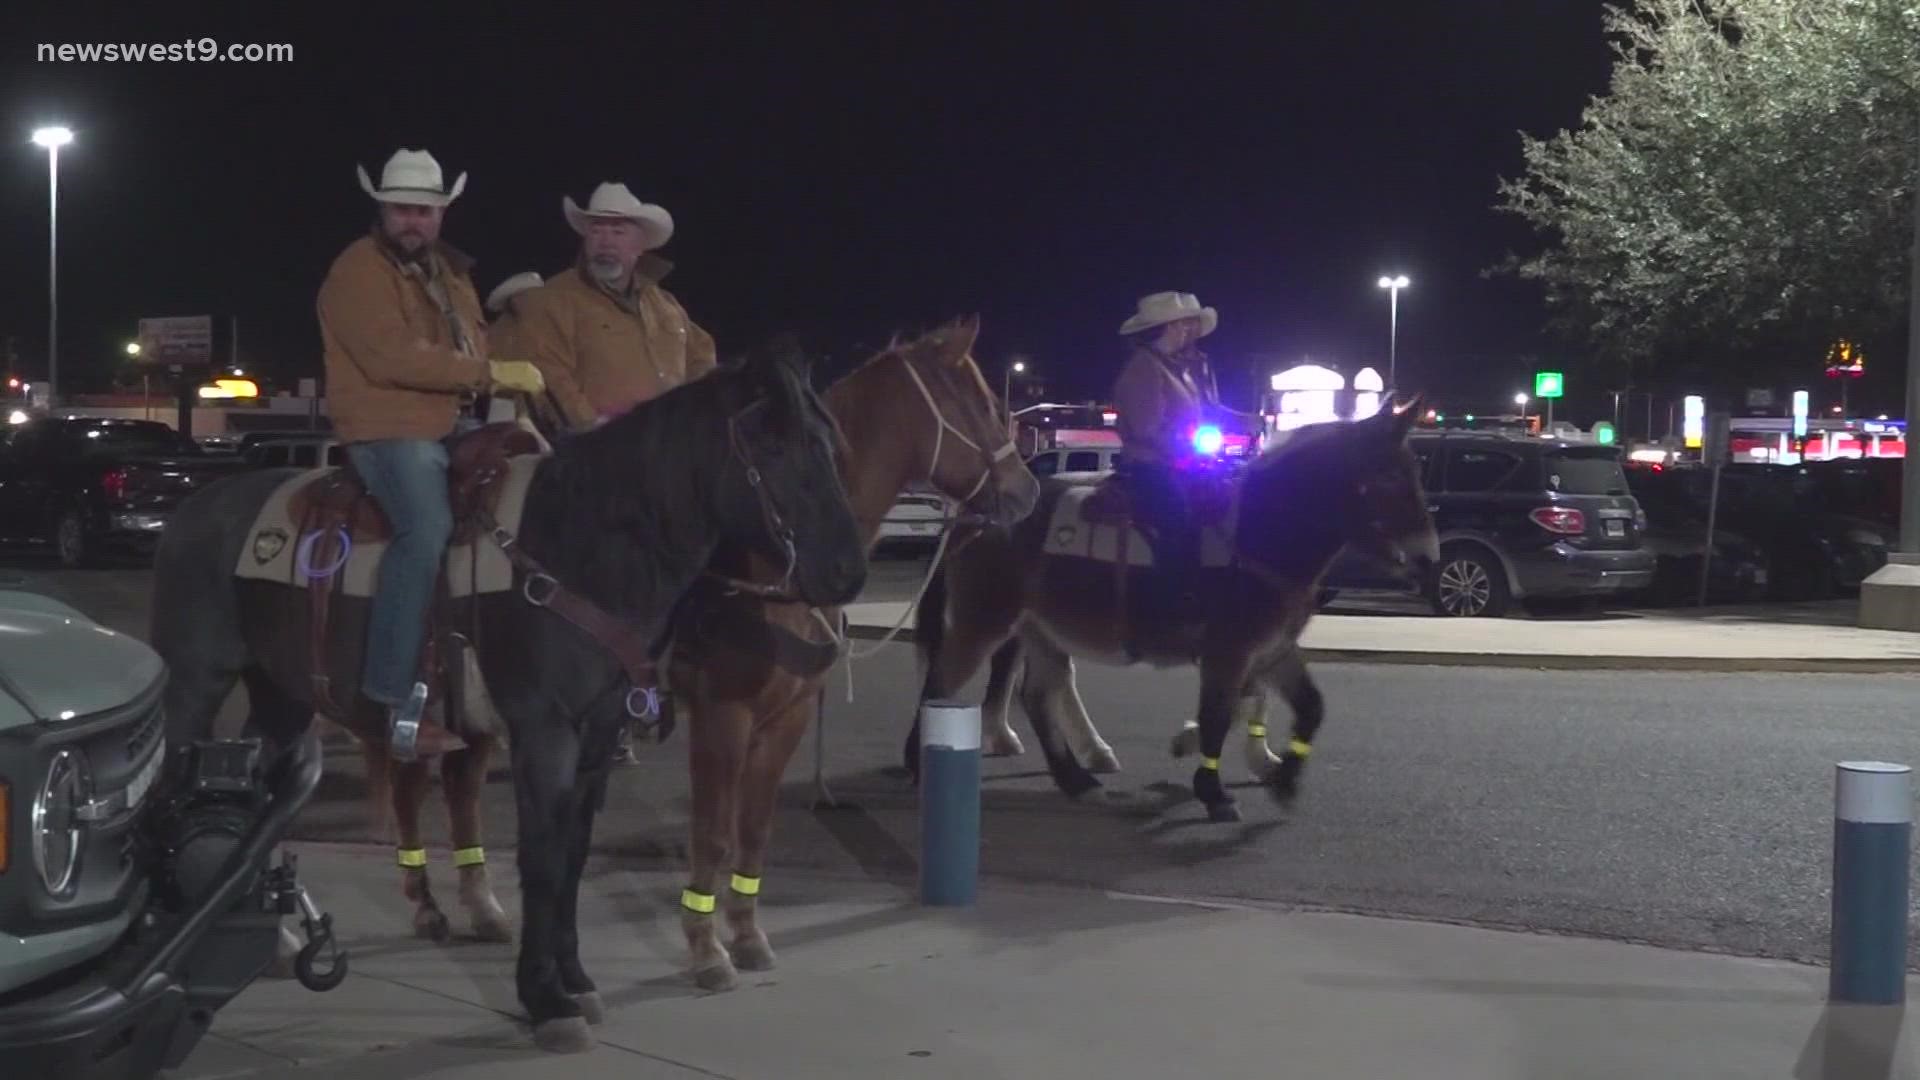 "We start planning the day after the rodeo is over," Joe Commander said regarding security prep at the Sandhills Stock Show and Rodeo.